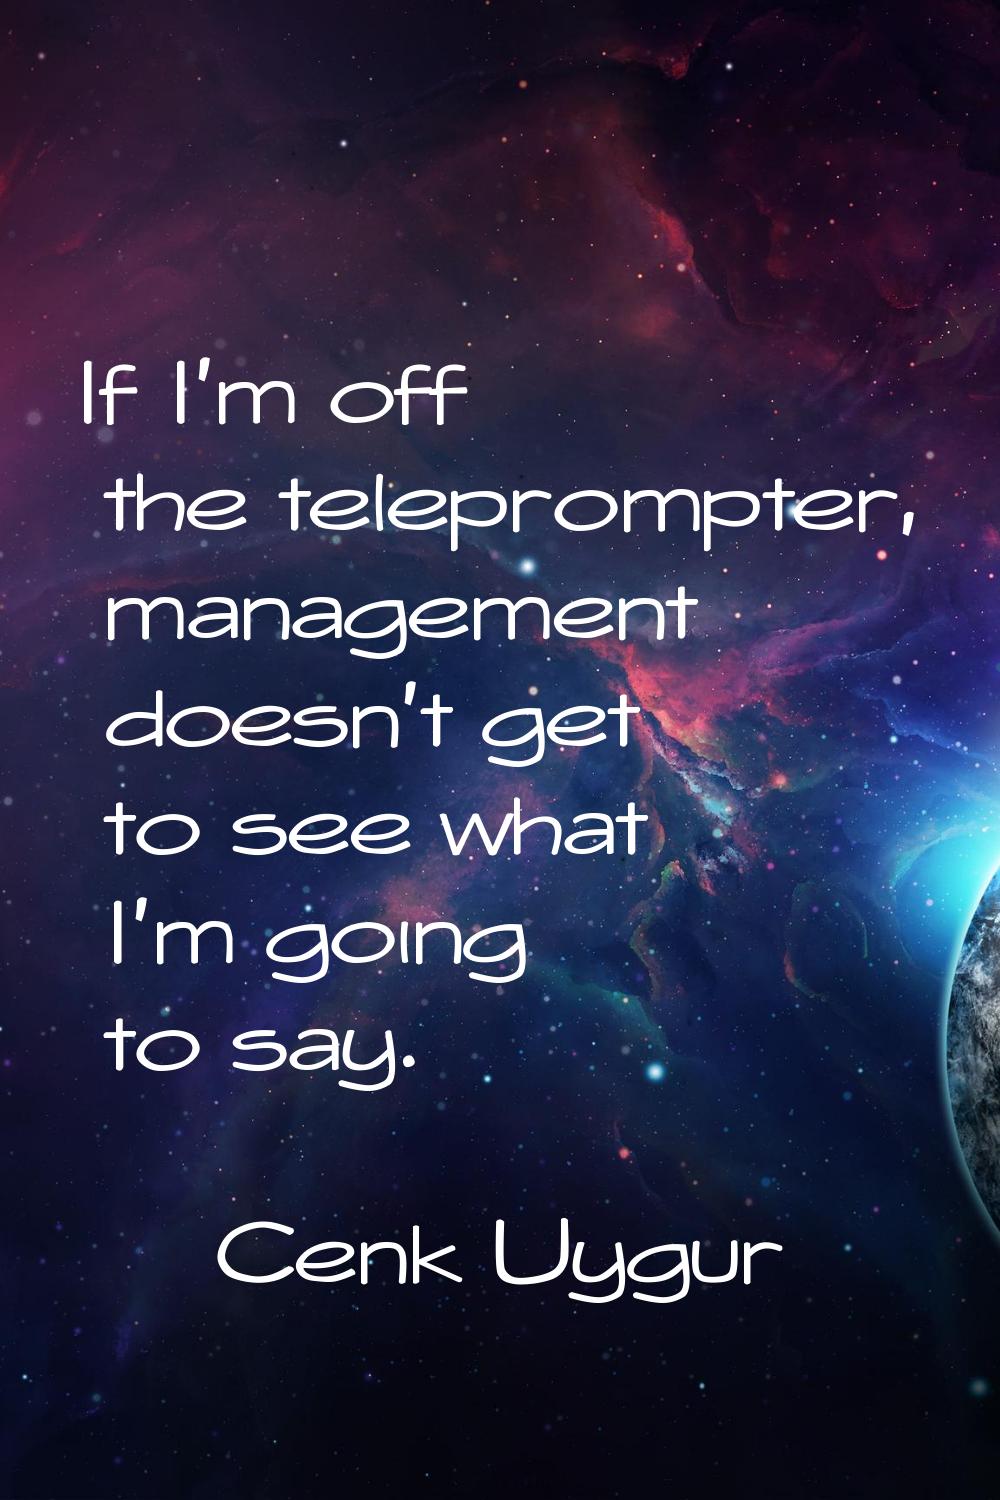 If I'm off the teleprompter, management doesn't get to see what I'm going to say.